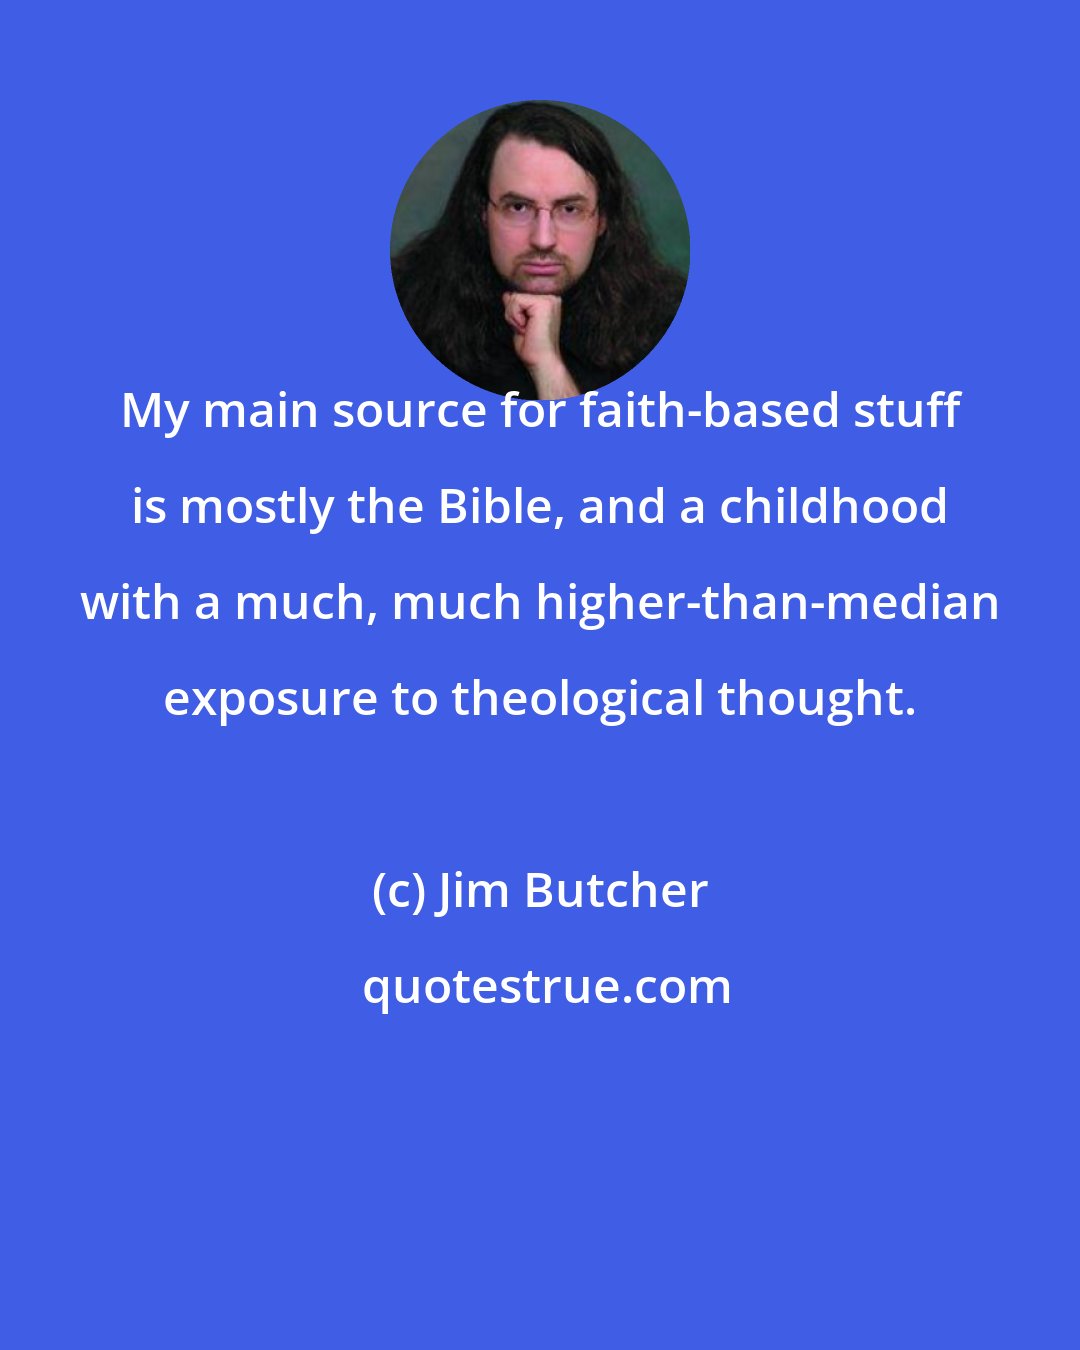 Jim Butcher: My main source for faith-based stuff is mostly the Bible, and a childhood with a much, much higher-than-median exposure to theological thought.